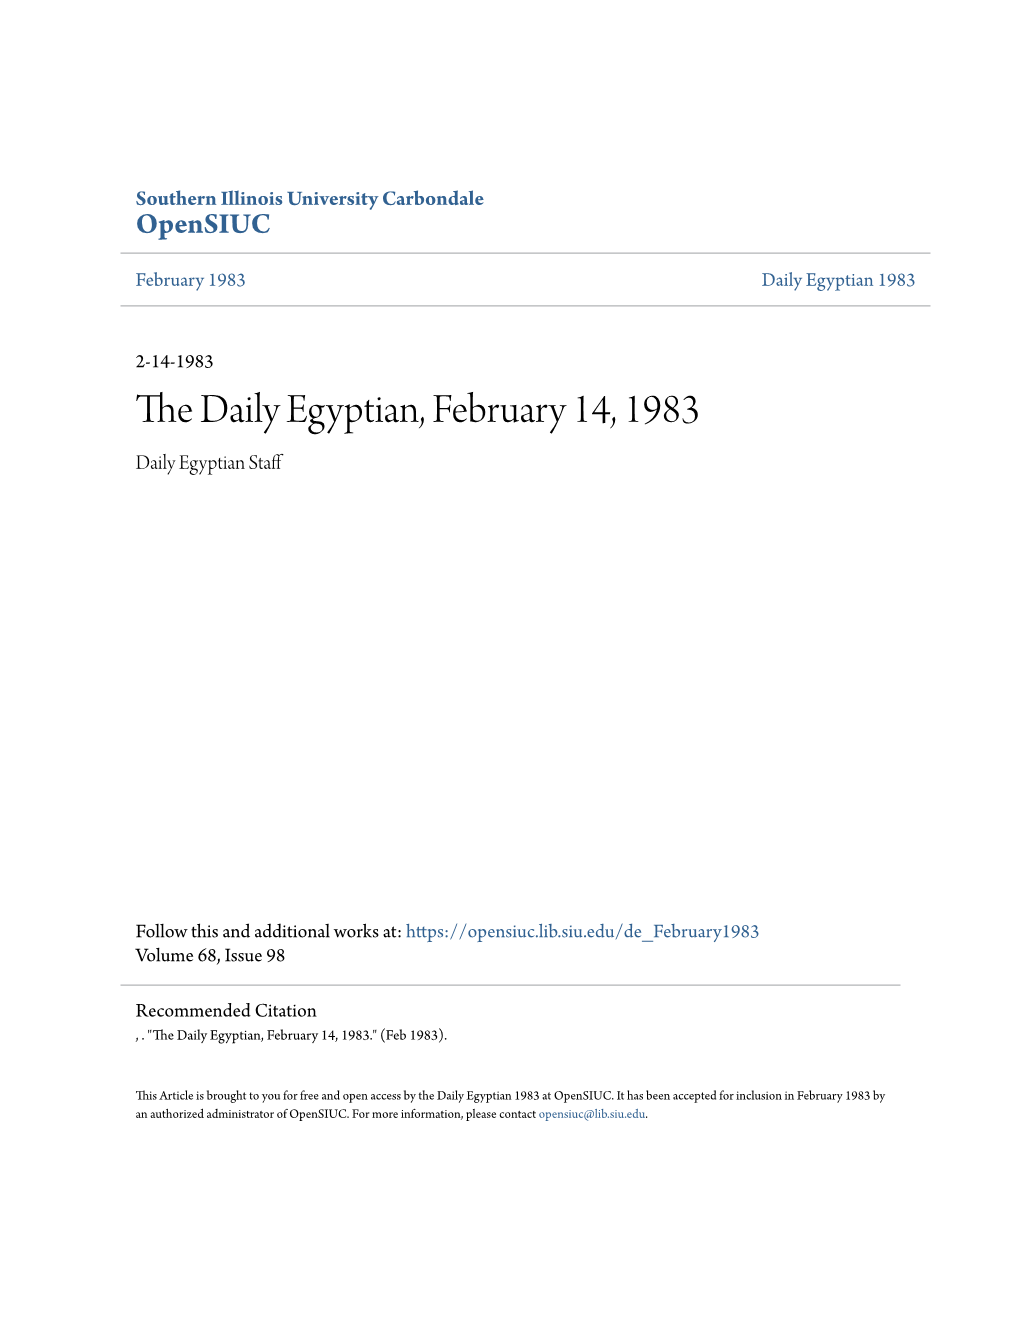 The Daily Egyptian, February 14, 1983